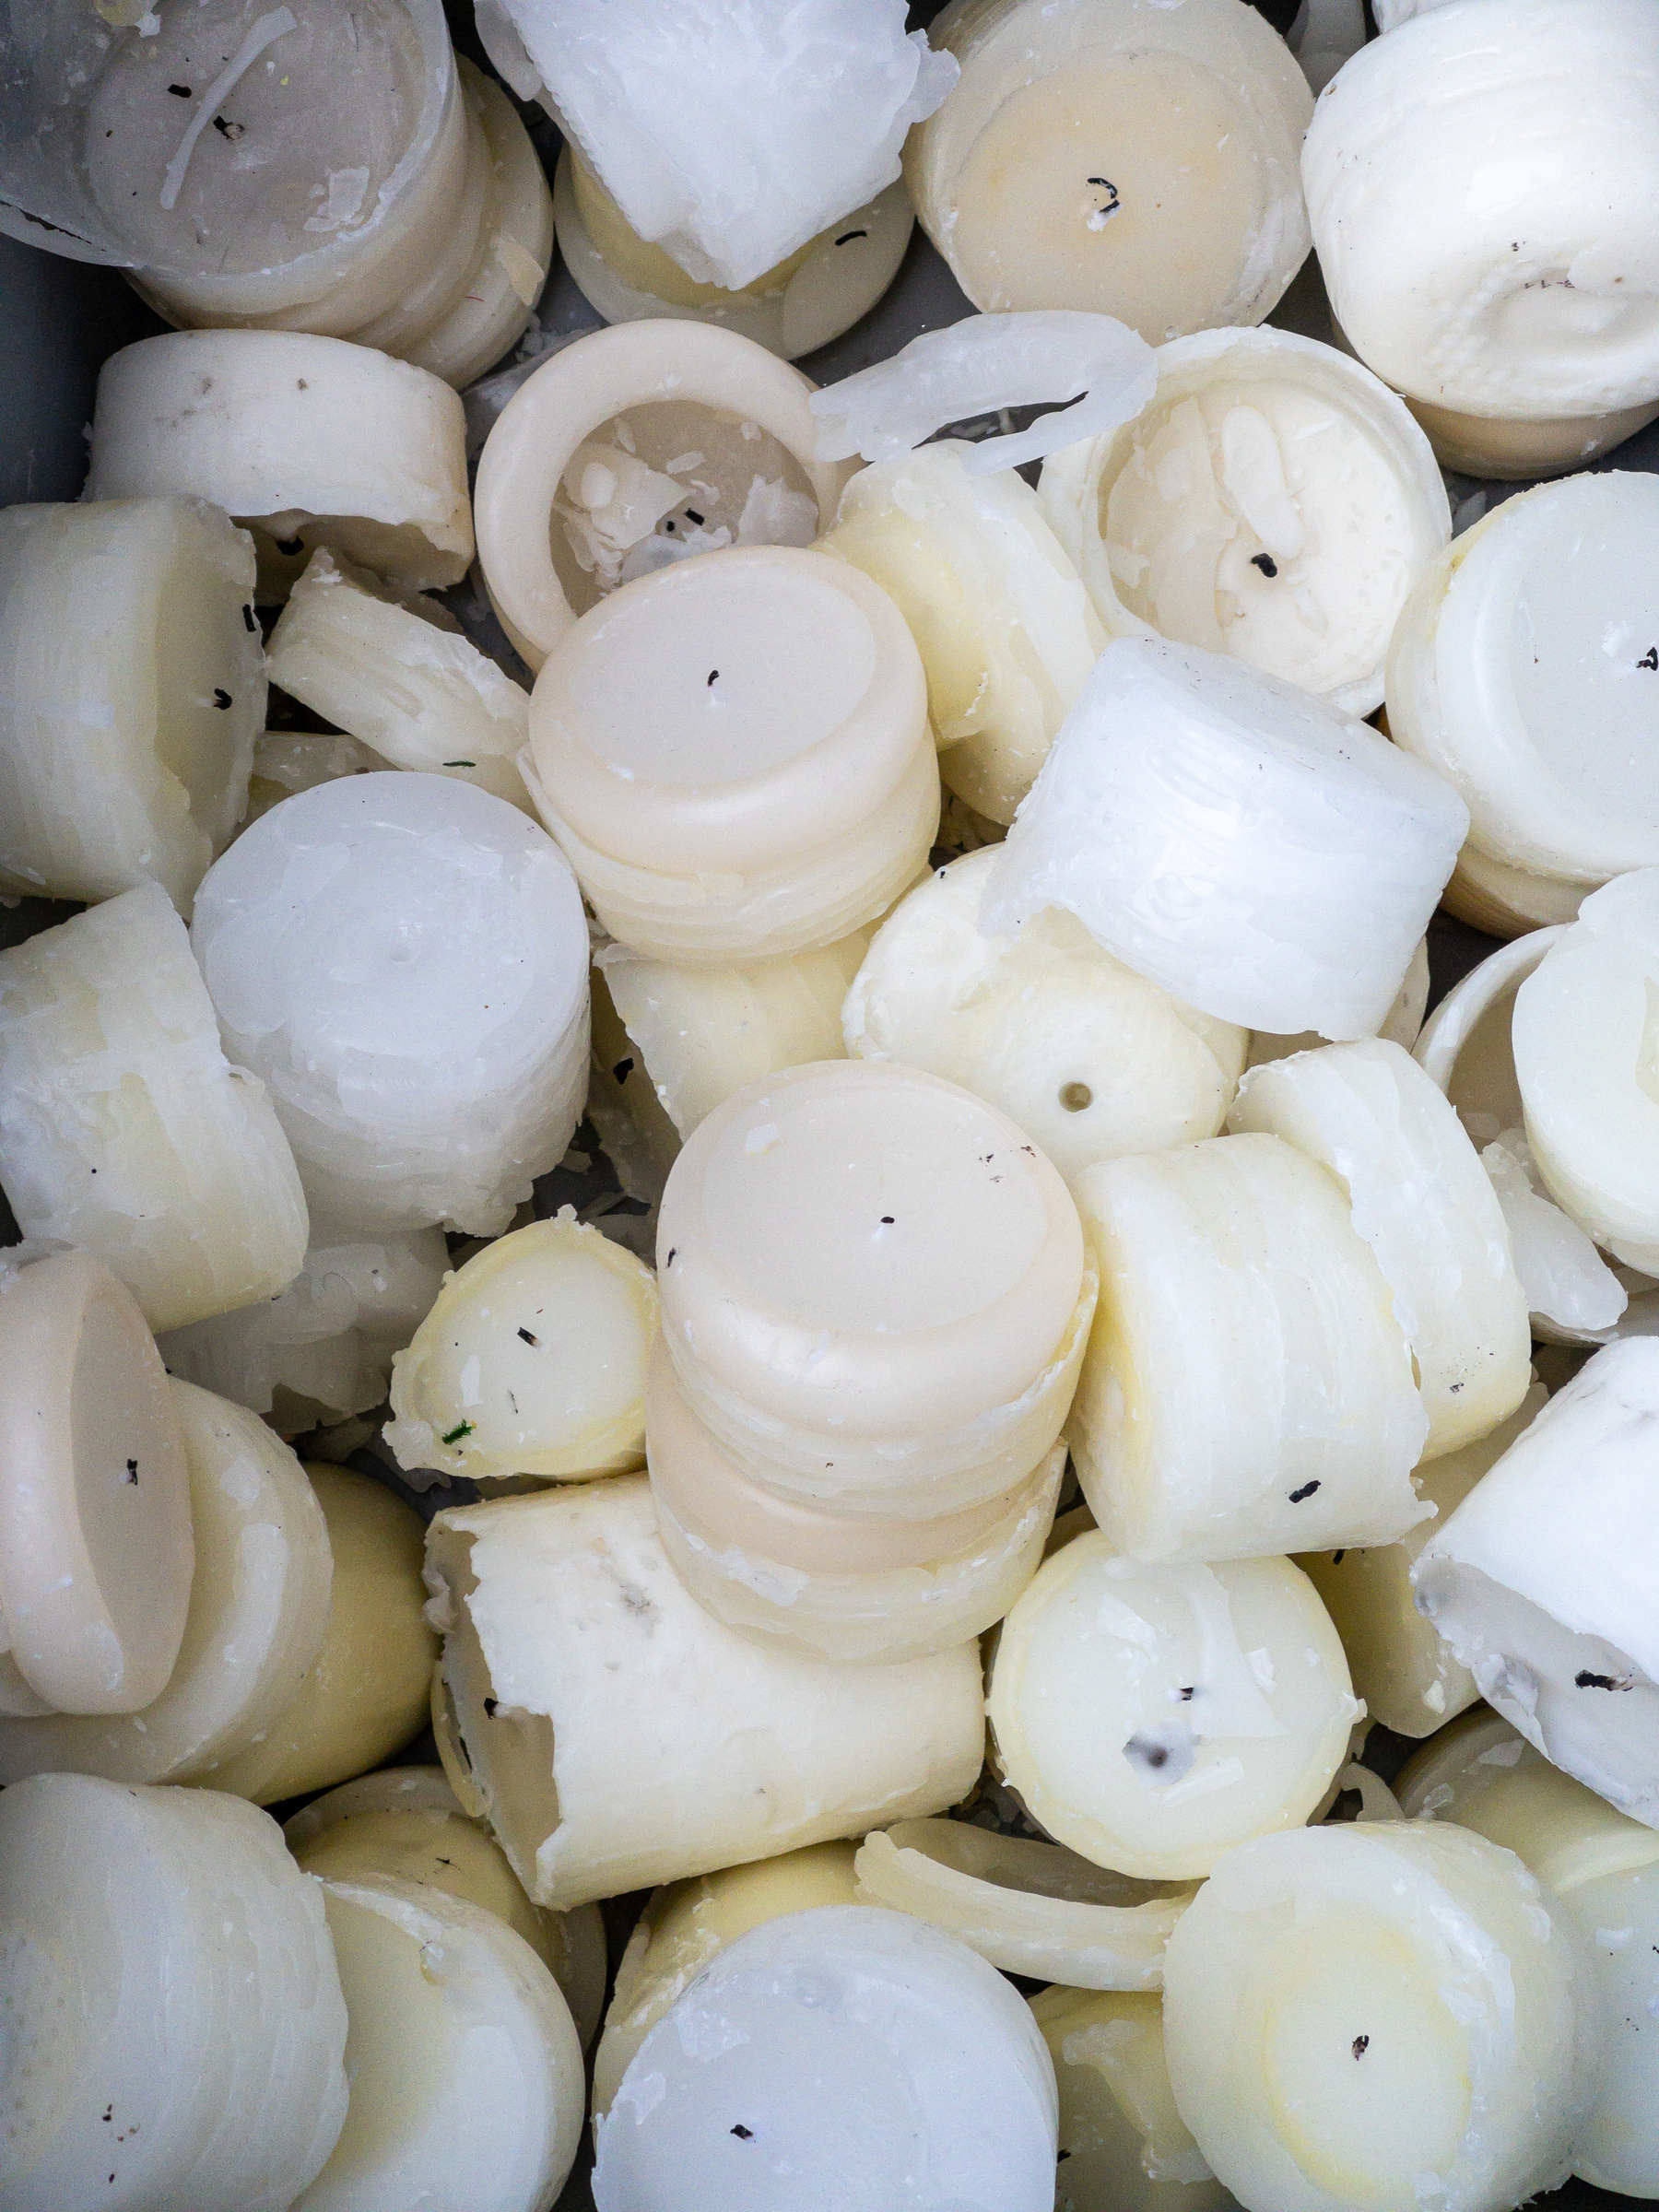 Pile of partially used white candles.